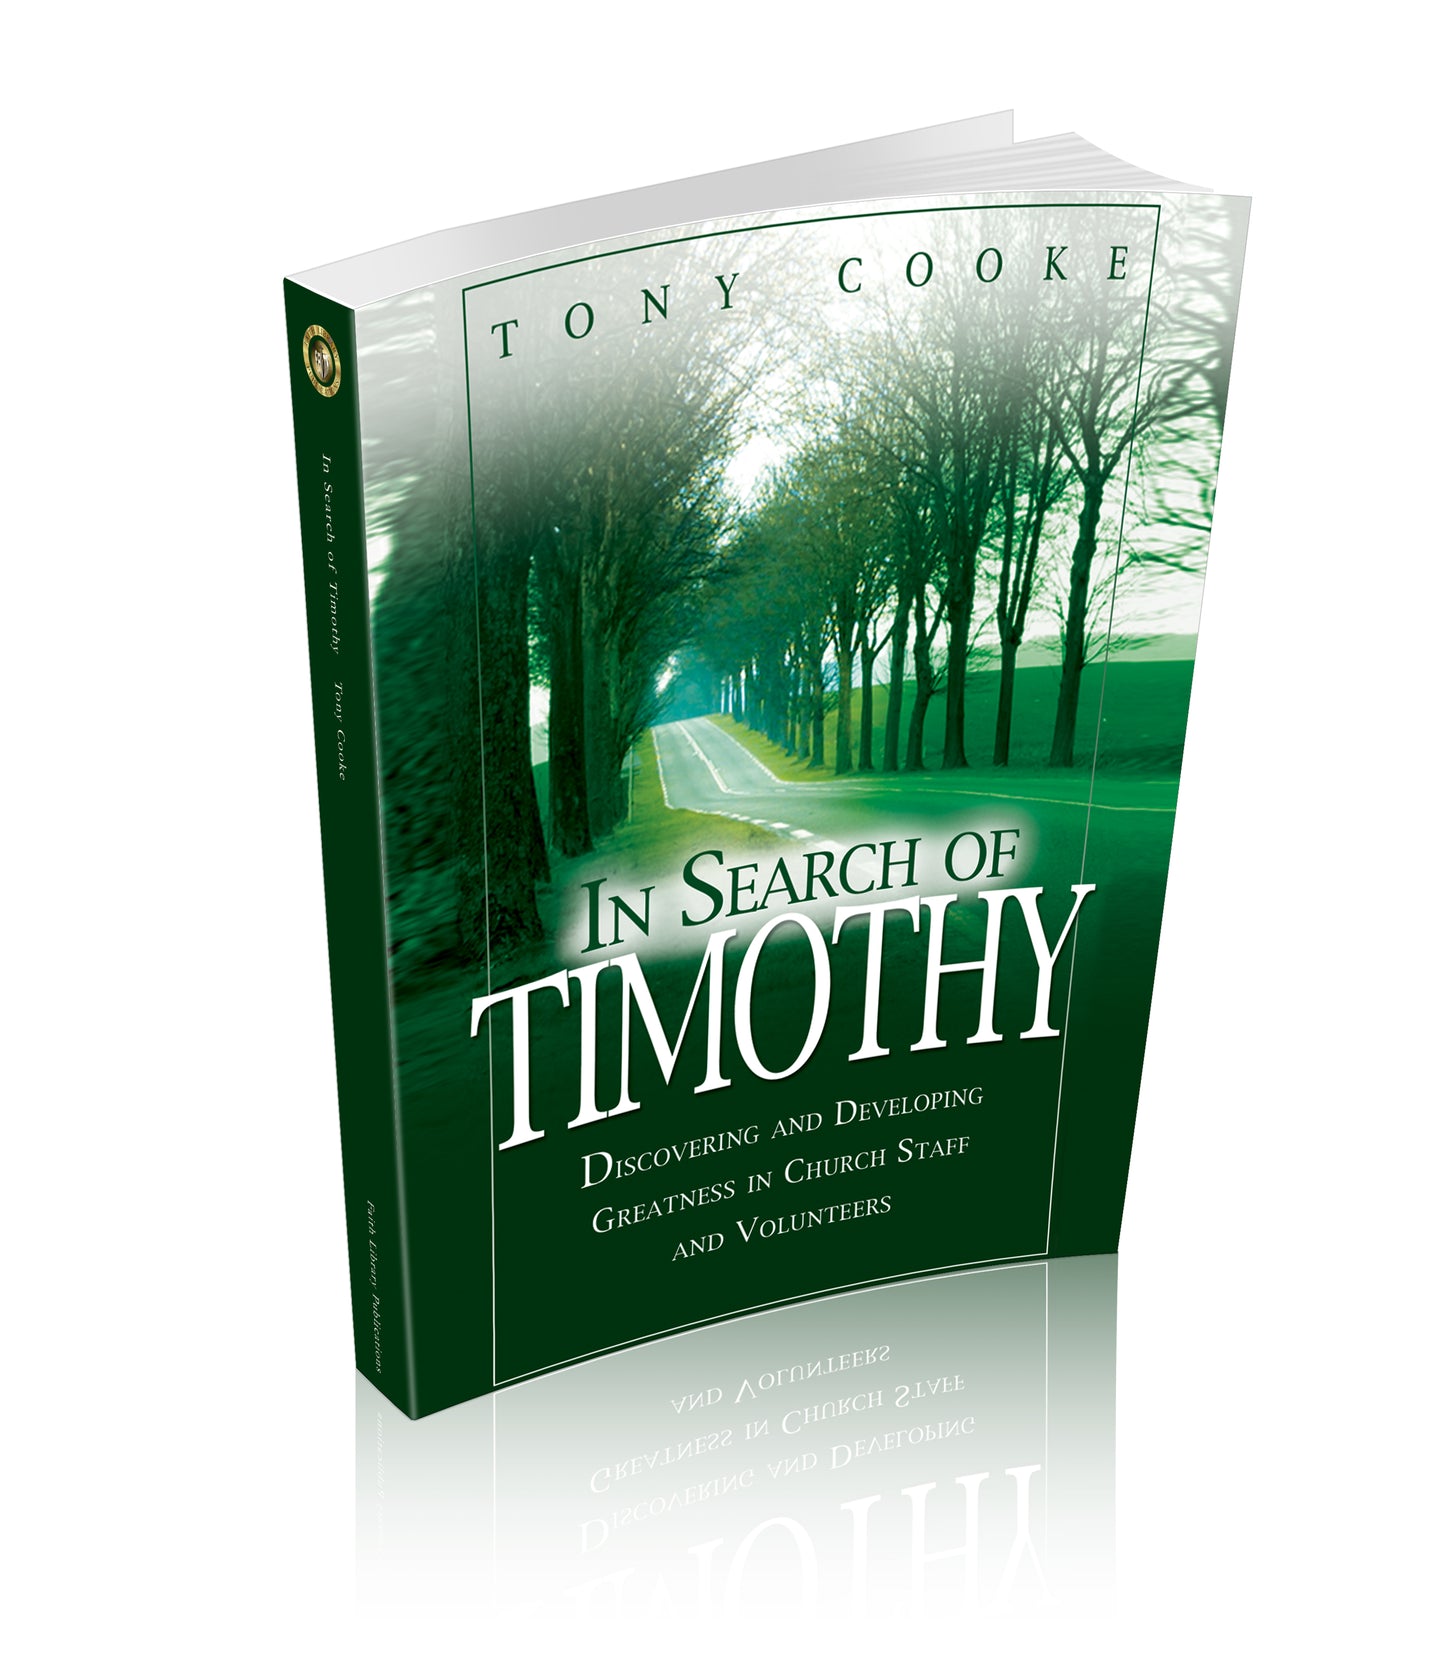 In Search of Timothy